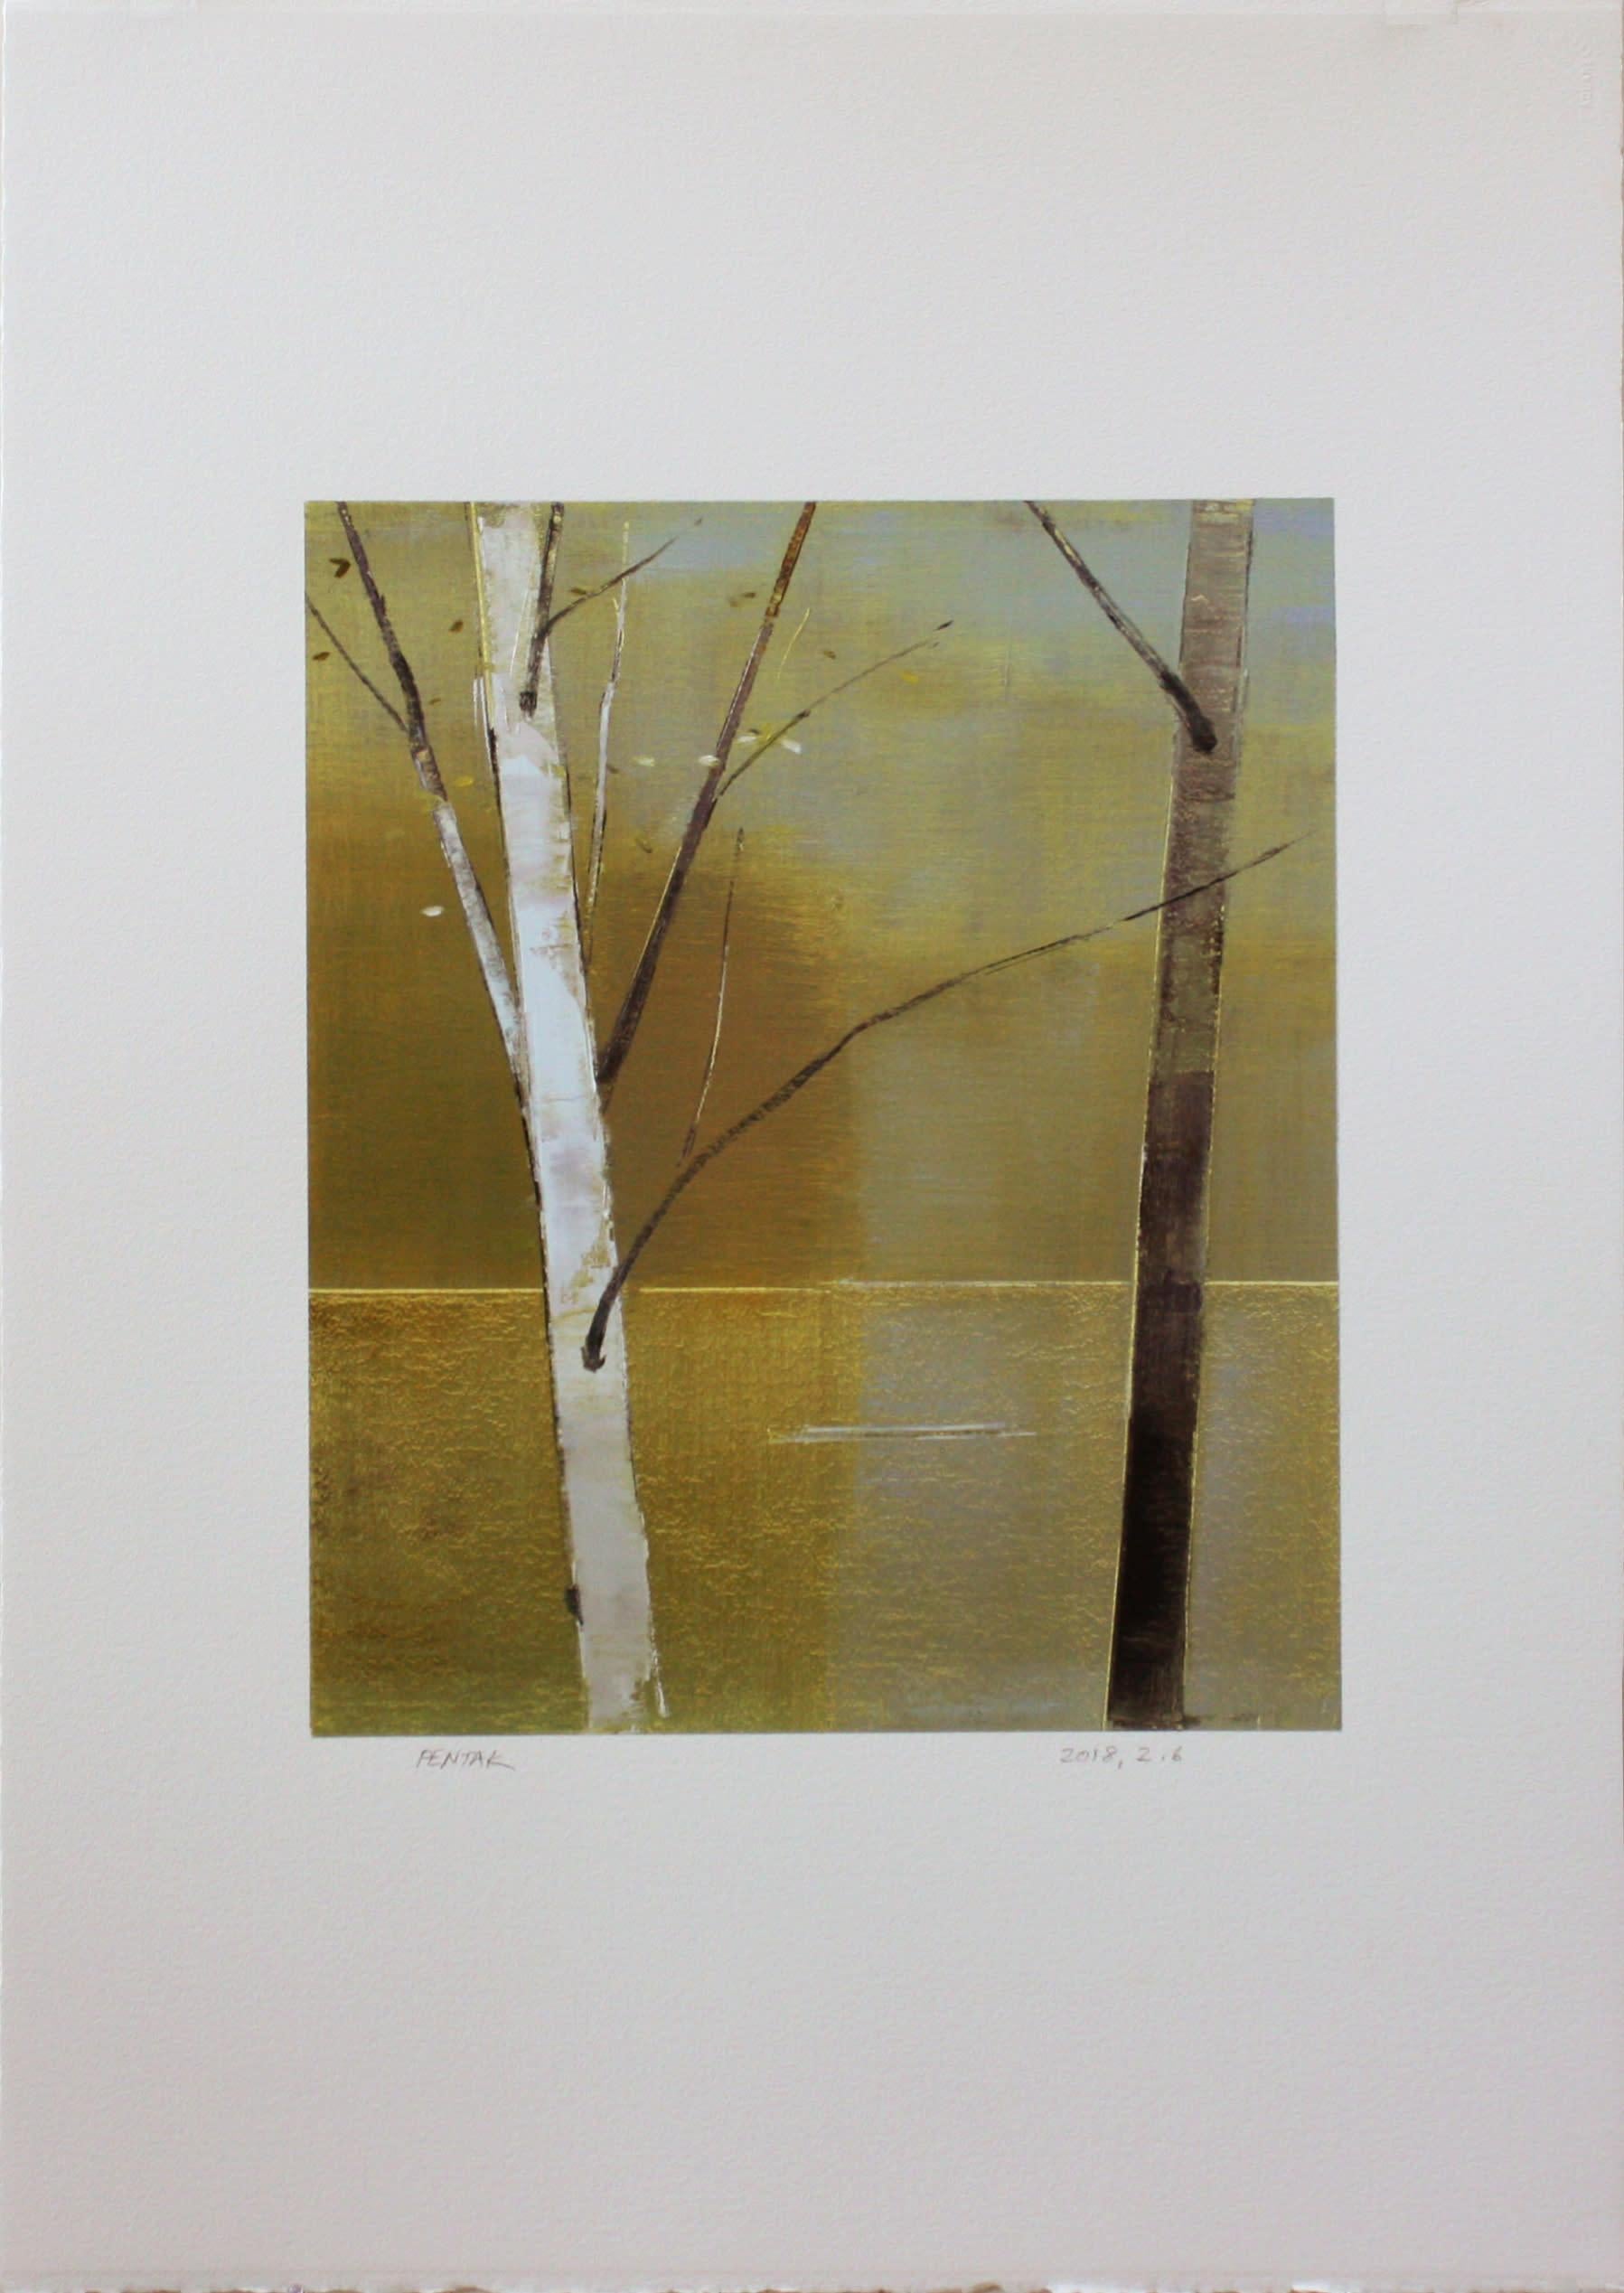 Stephen Pentak
2018, 2.6, 2018
oil on paper
paper size: 42 x 30 in.
image size: 22.5 x 19 in.
(pent473)

This original oil painting on paper by Stephen Pentak depicts a serene and beautiful lake waterscape in shades of brown, yellow, and